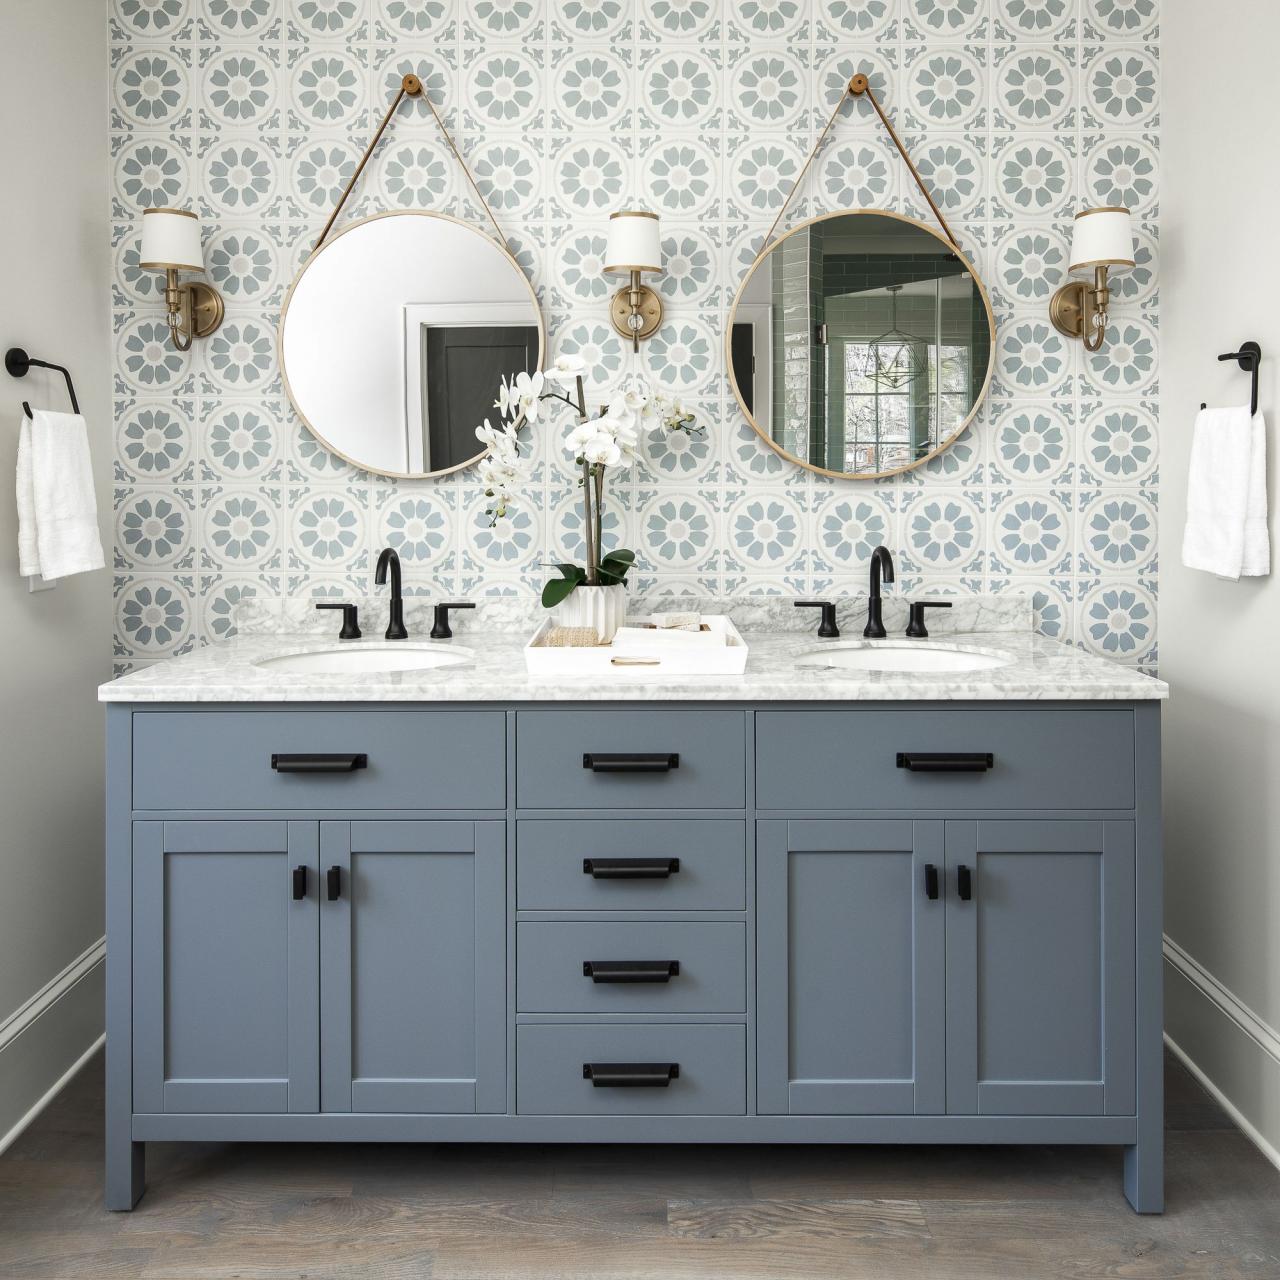 Striking master vanity wall with floor to ceiling porcelain tile